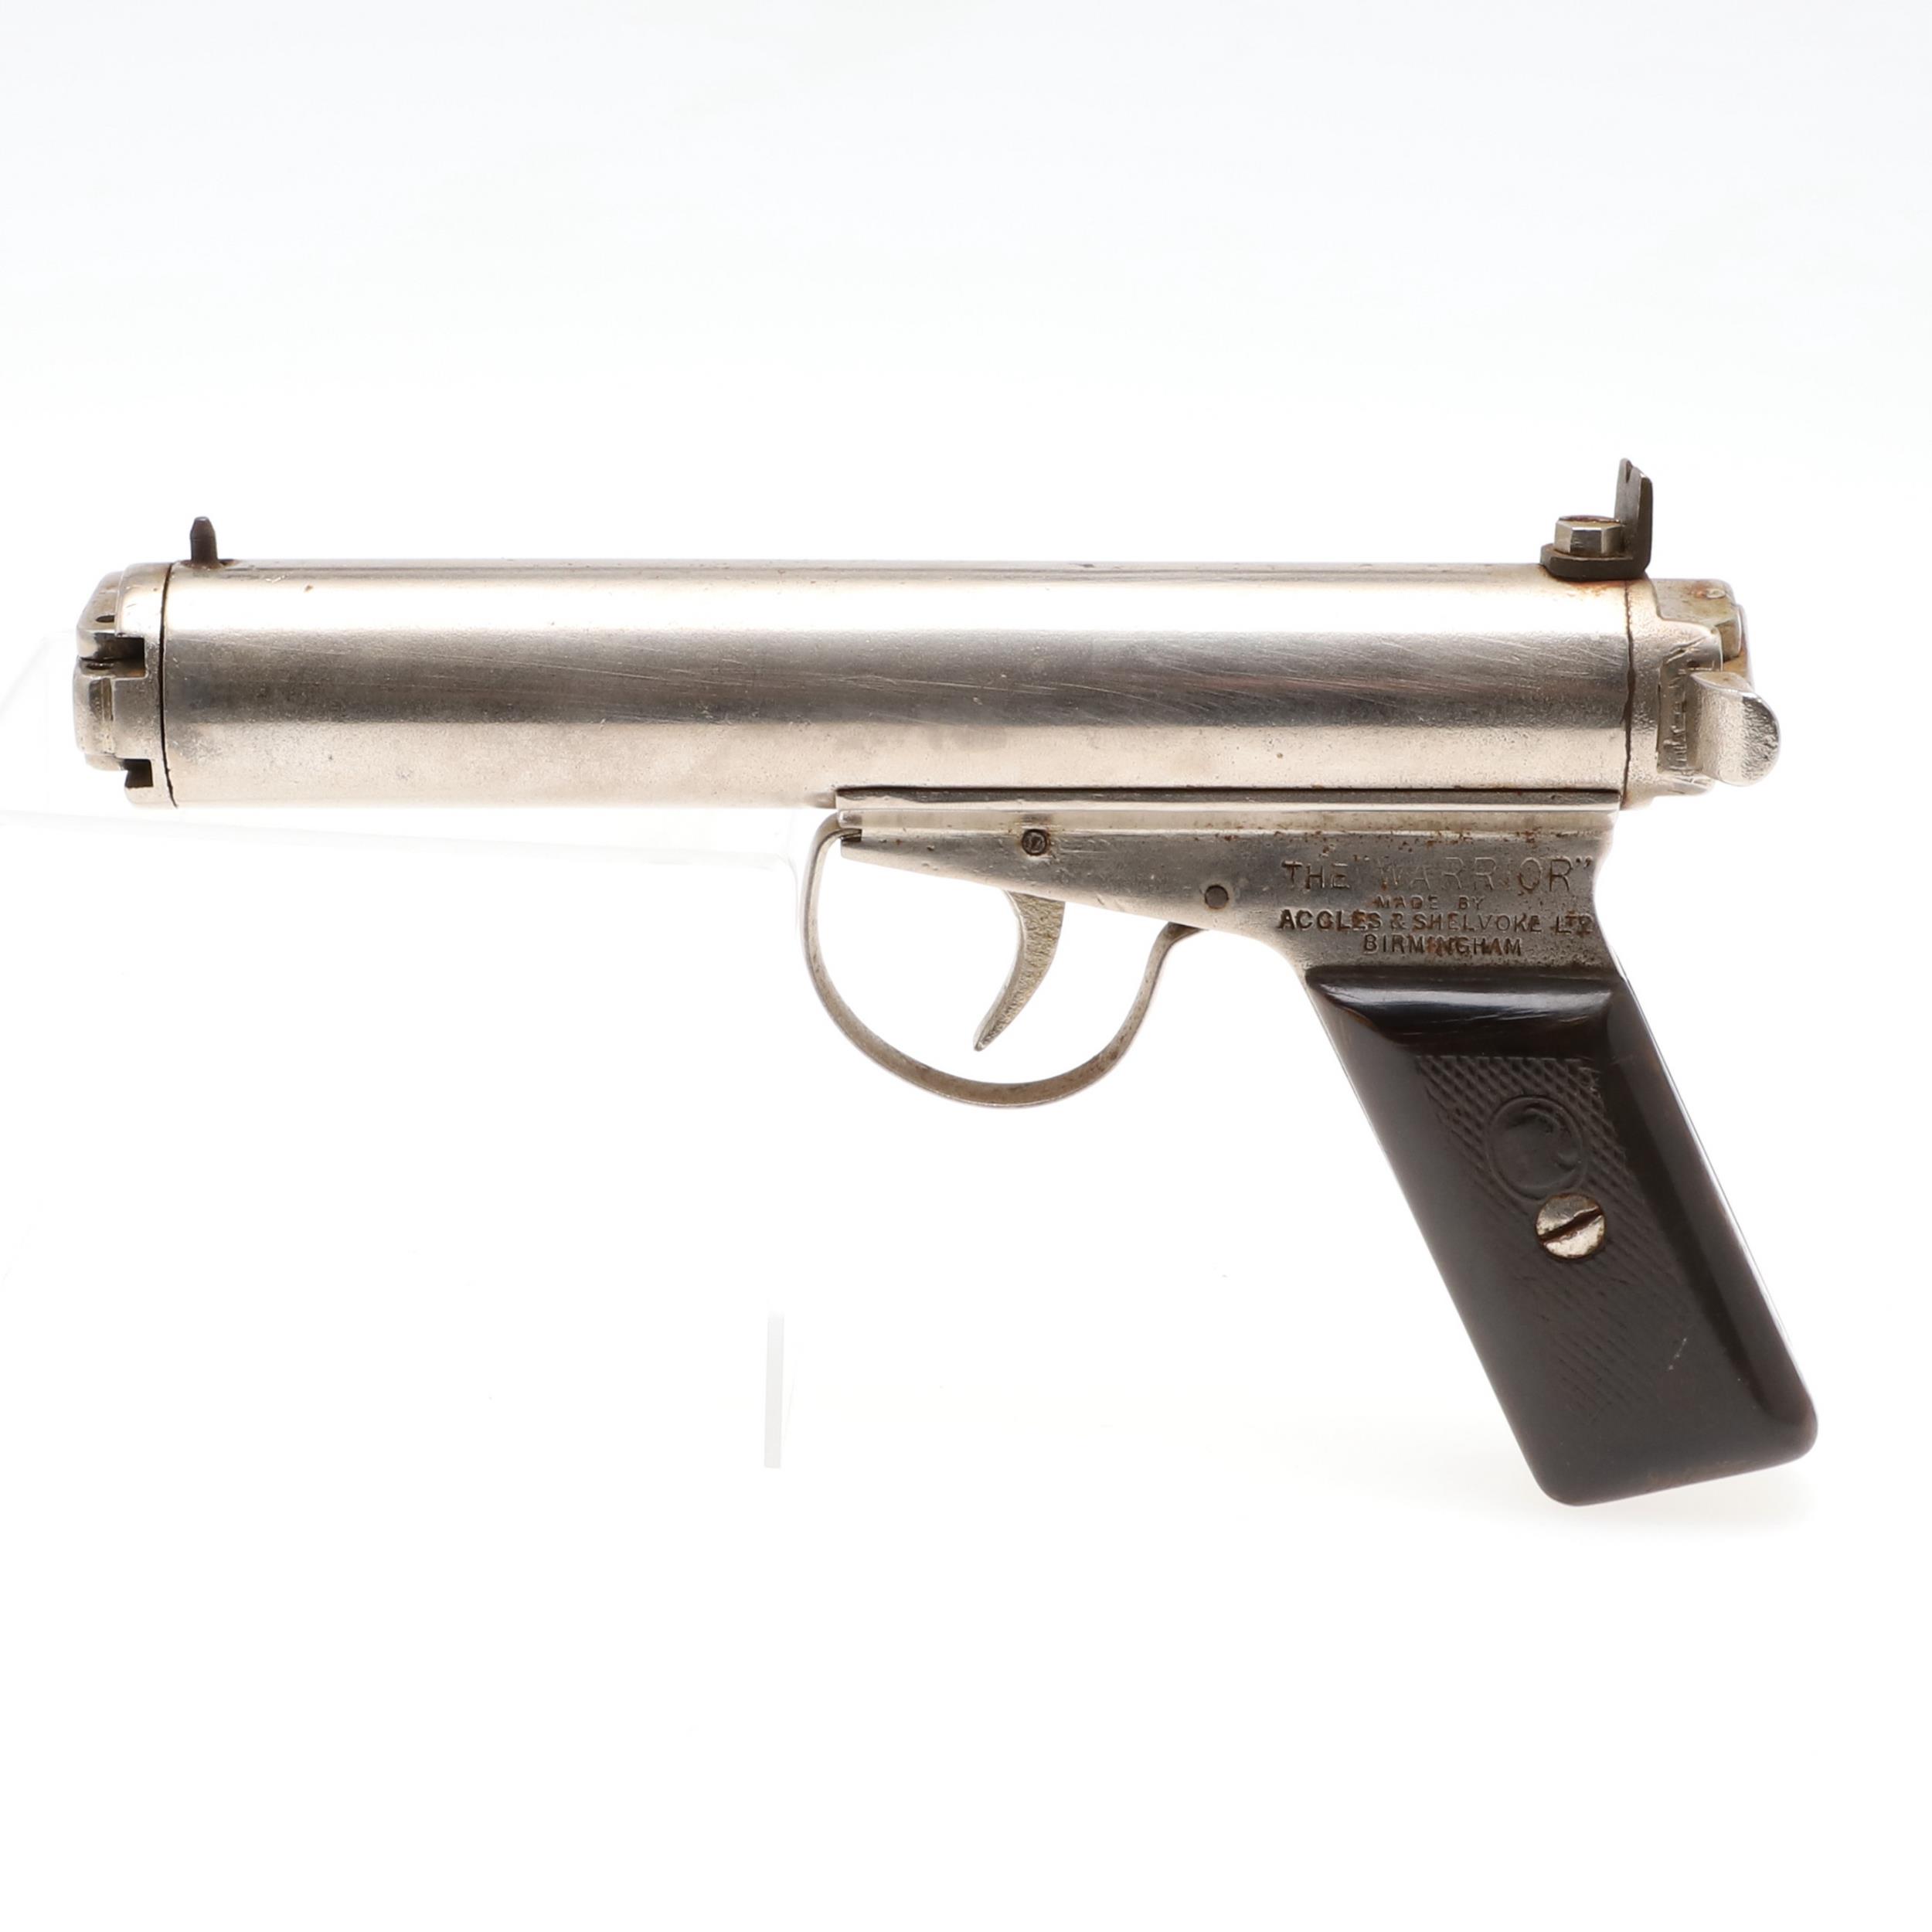 AN ACCLES AND SHELVOKE 'WARRIOR' .177 AIR PISTOL. - Image 6 of 10